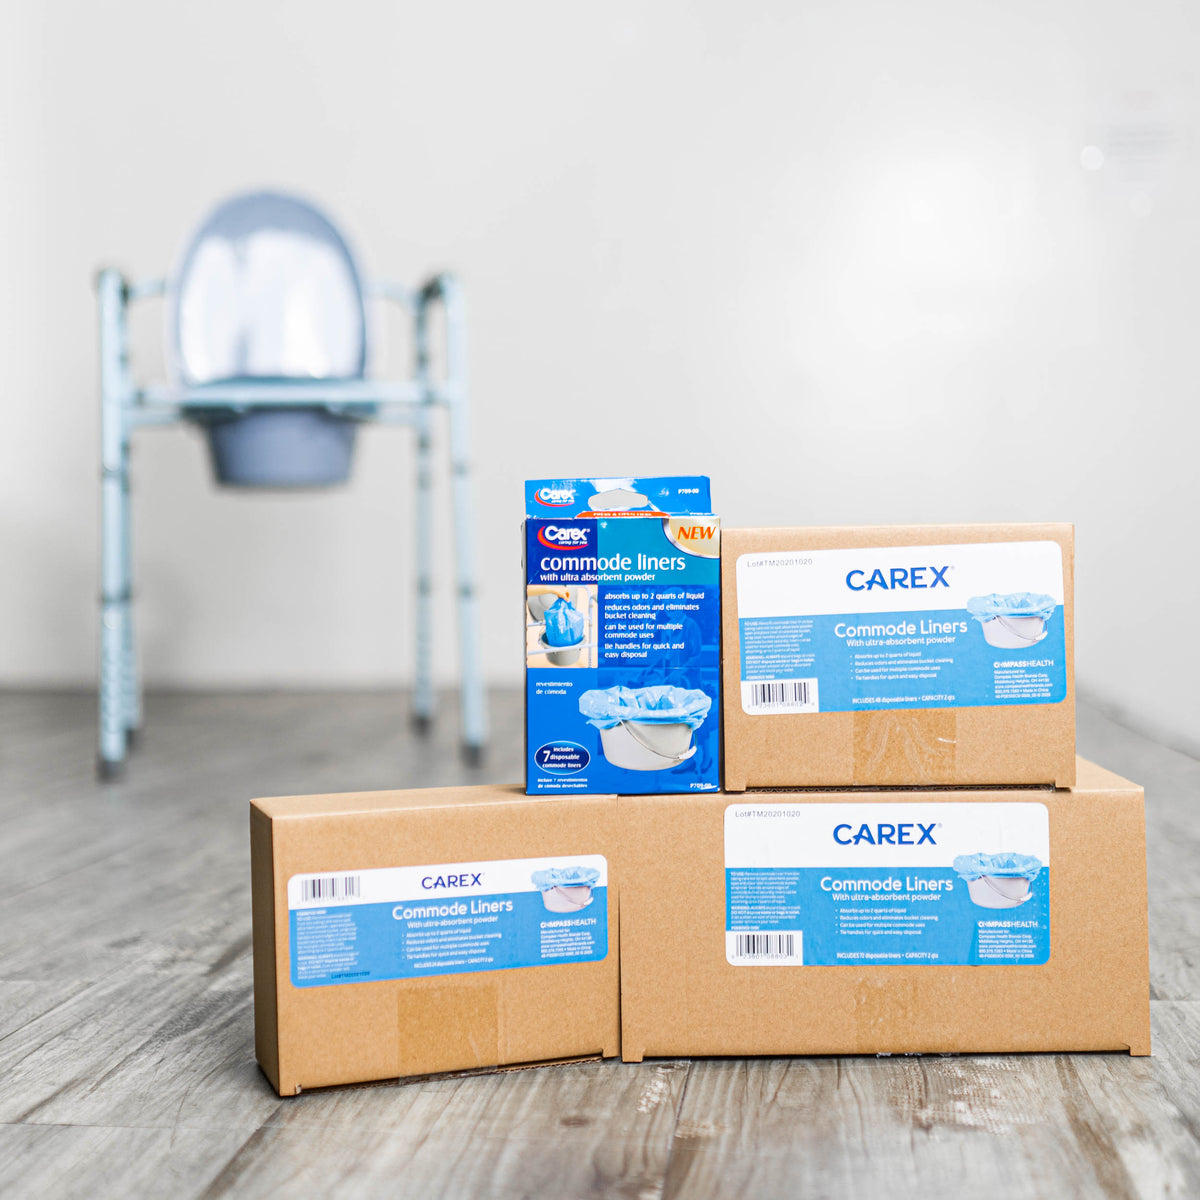 Carex commode liner packaging up close with a commode in the background 